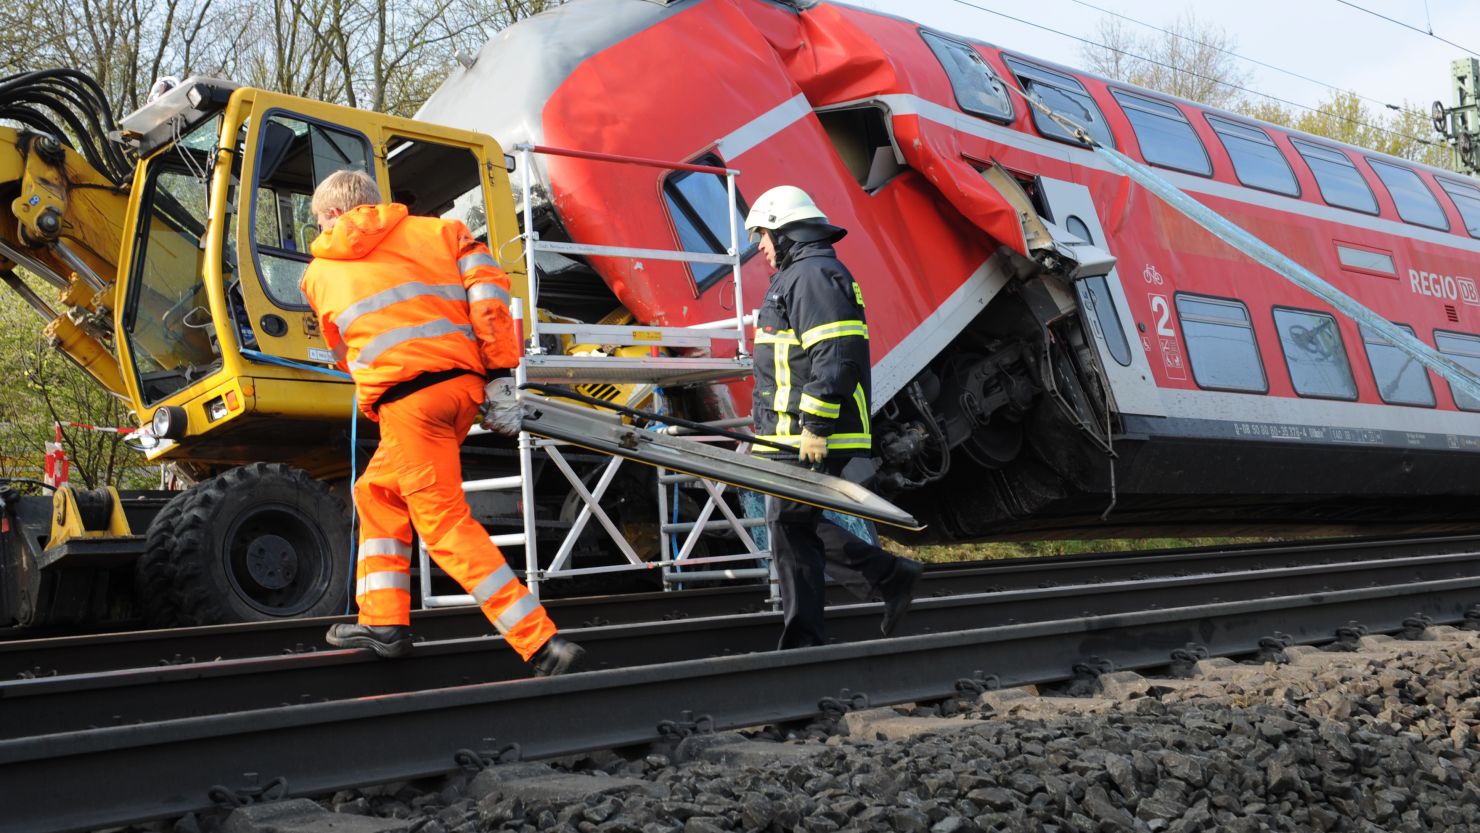 The train crash took place on the track near the city of Offenbach, close to Frankfurt, police said.